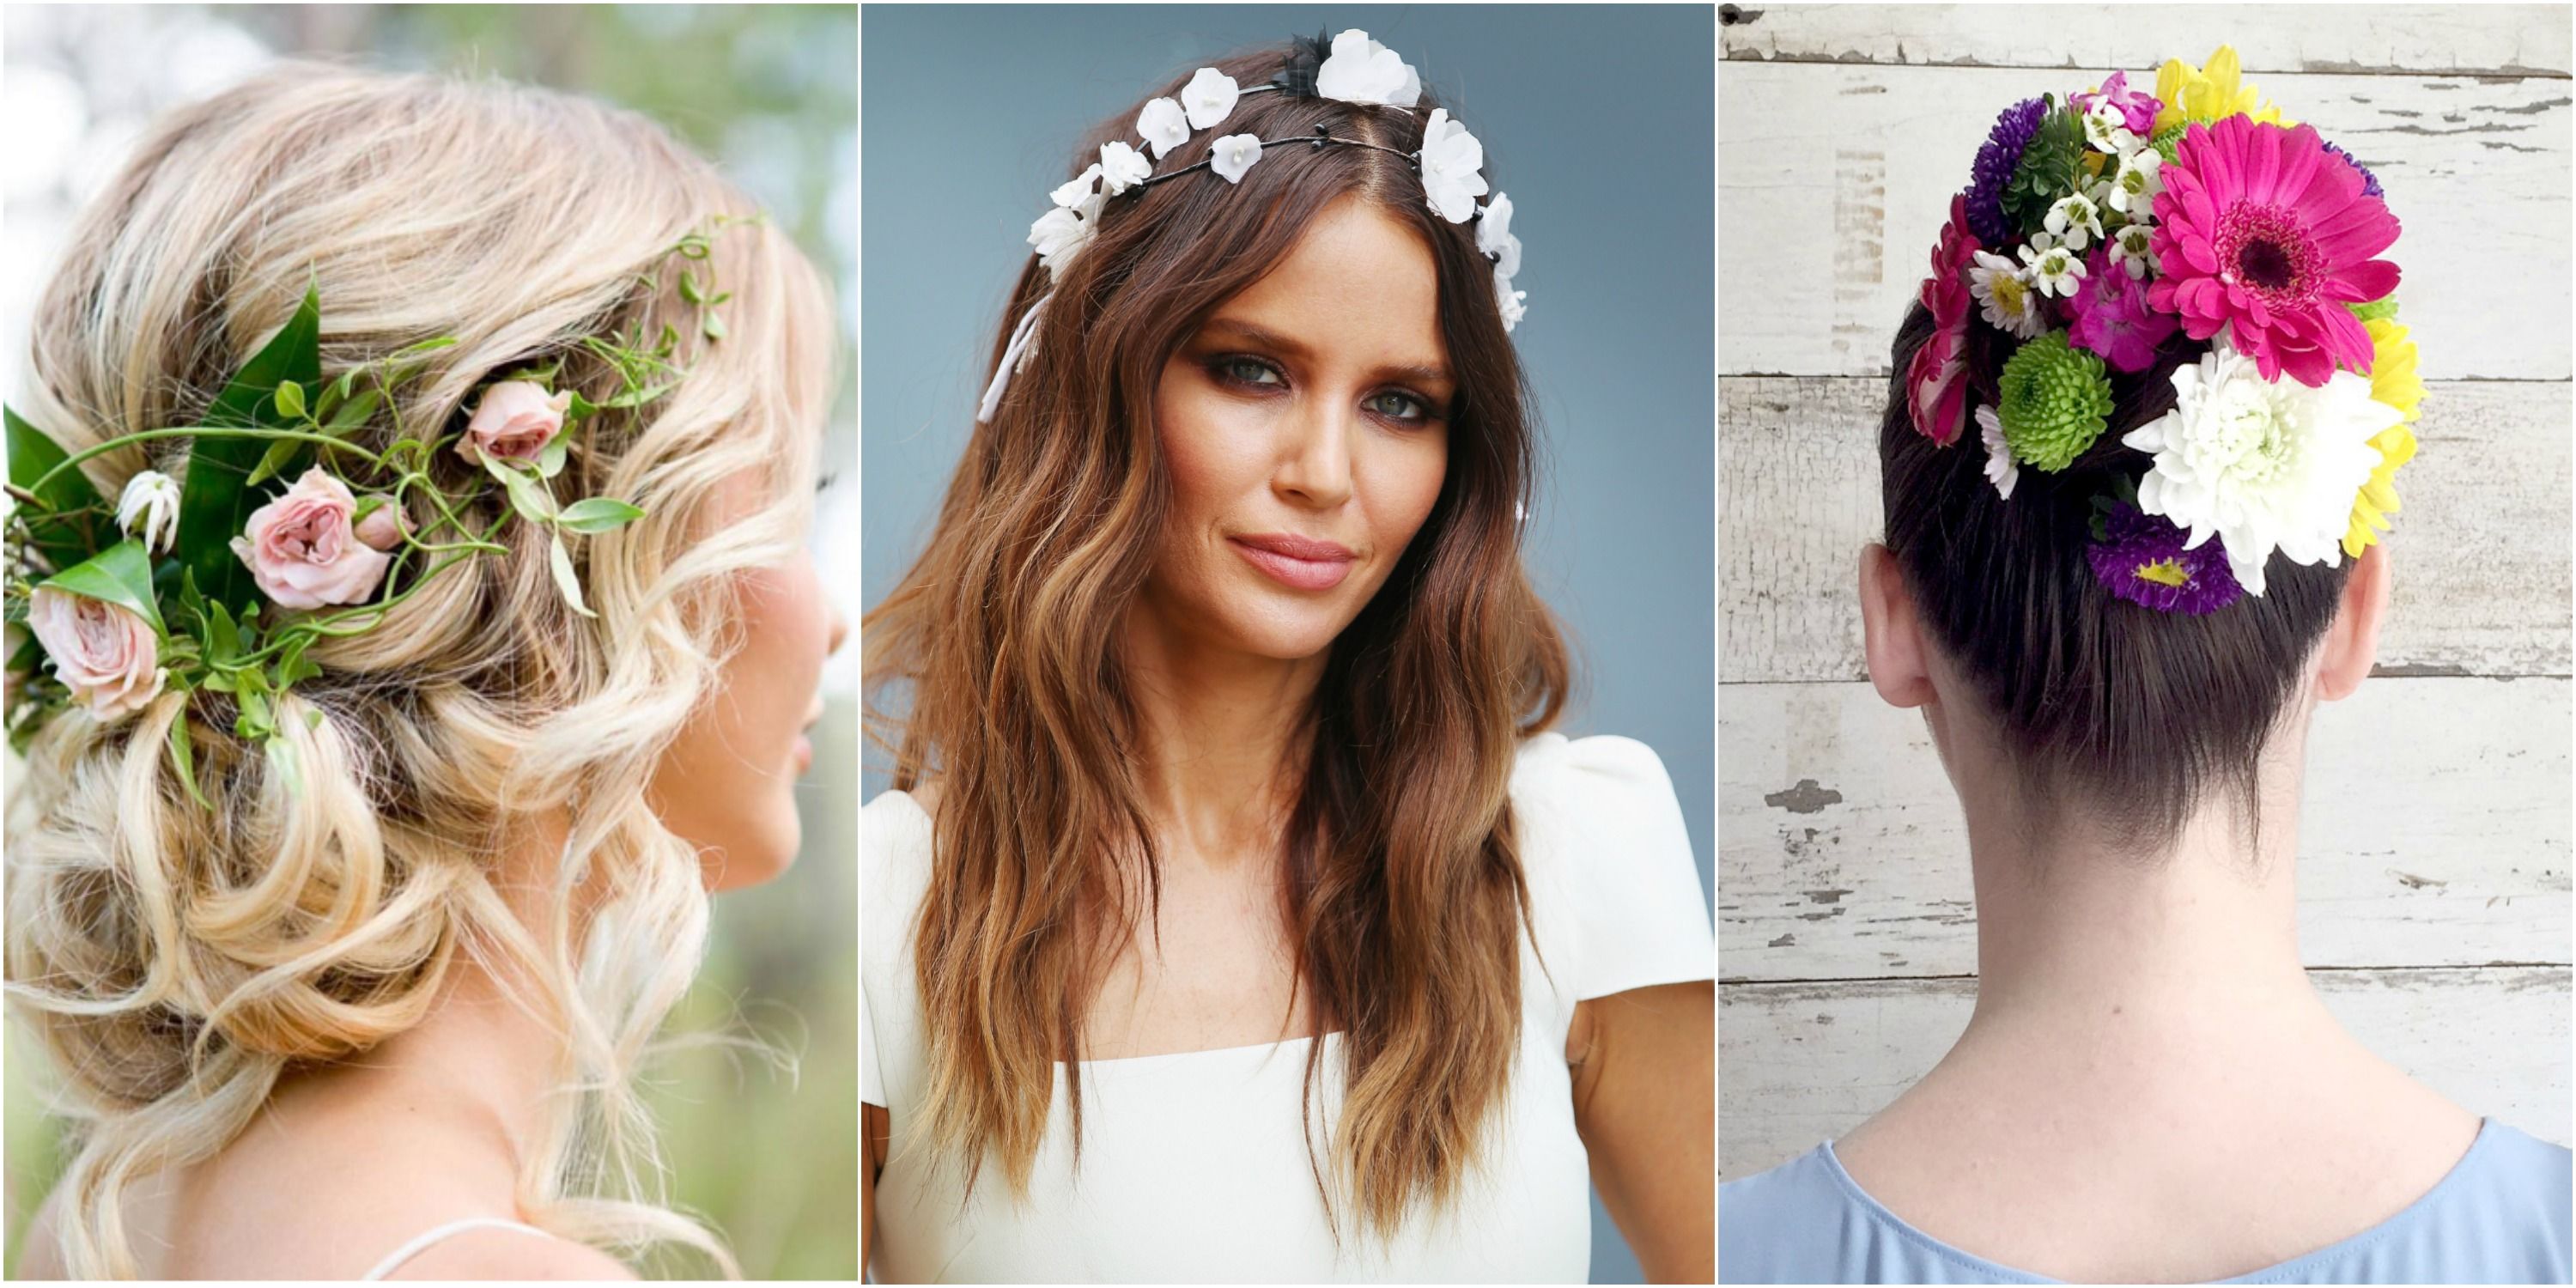 Wedding hairstyles with flowers 6 of our favourite options  Lavender   Rose